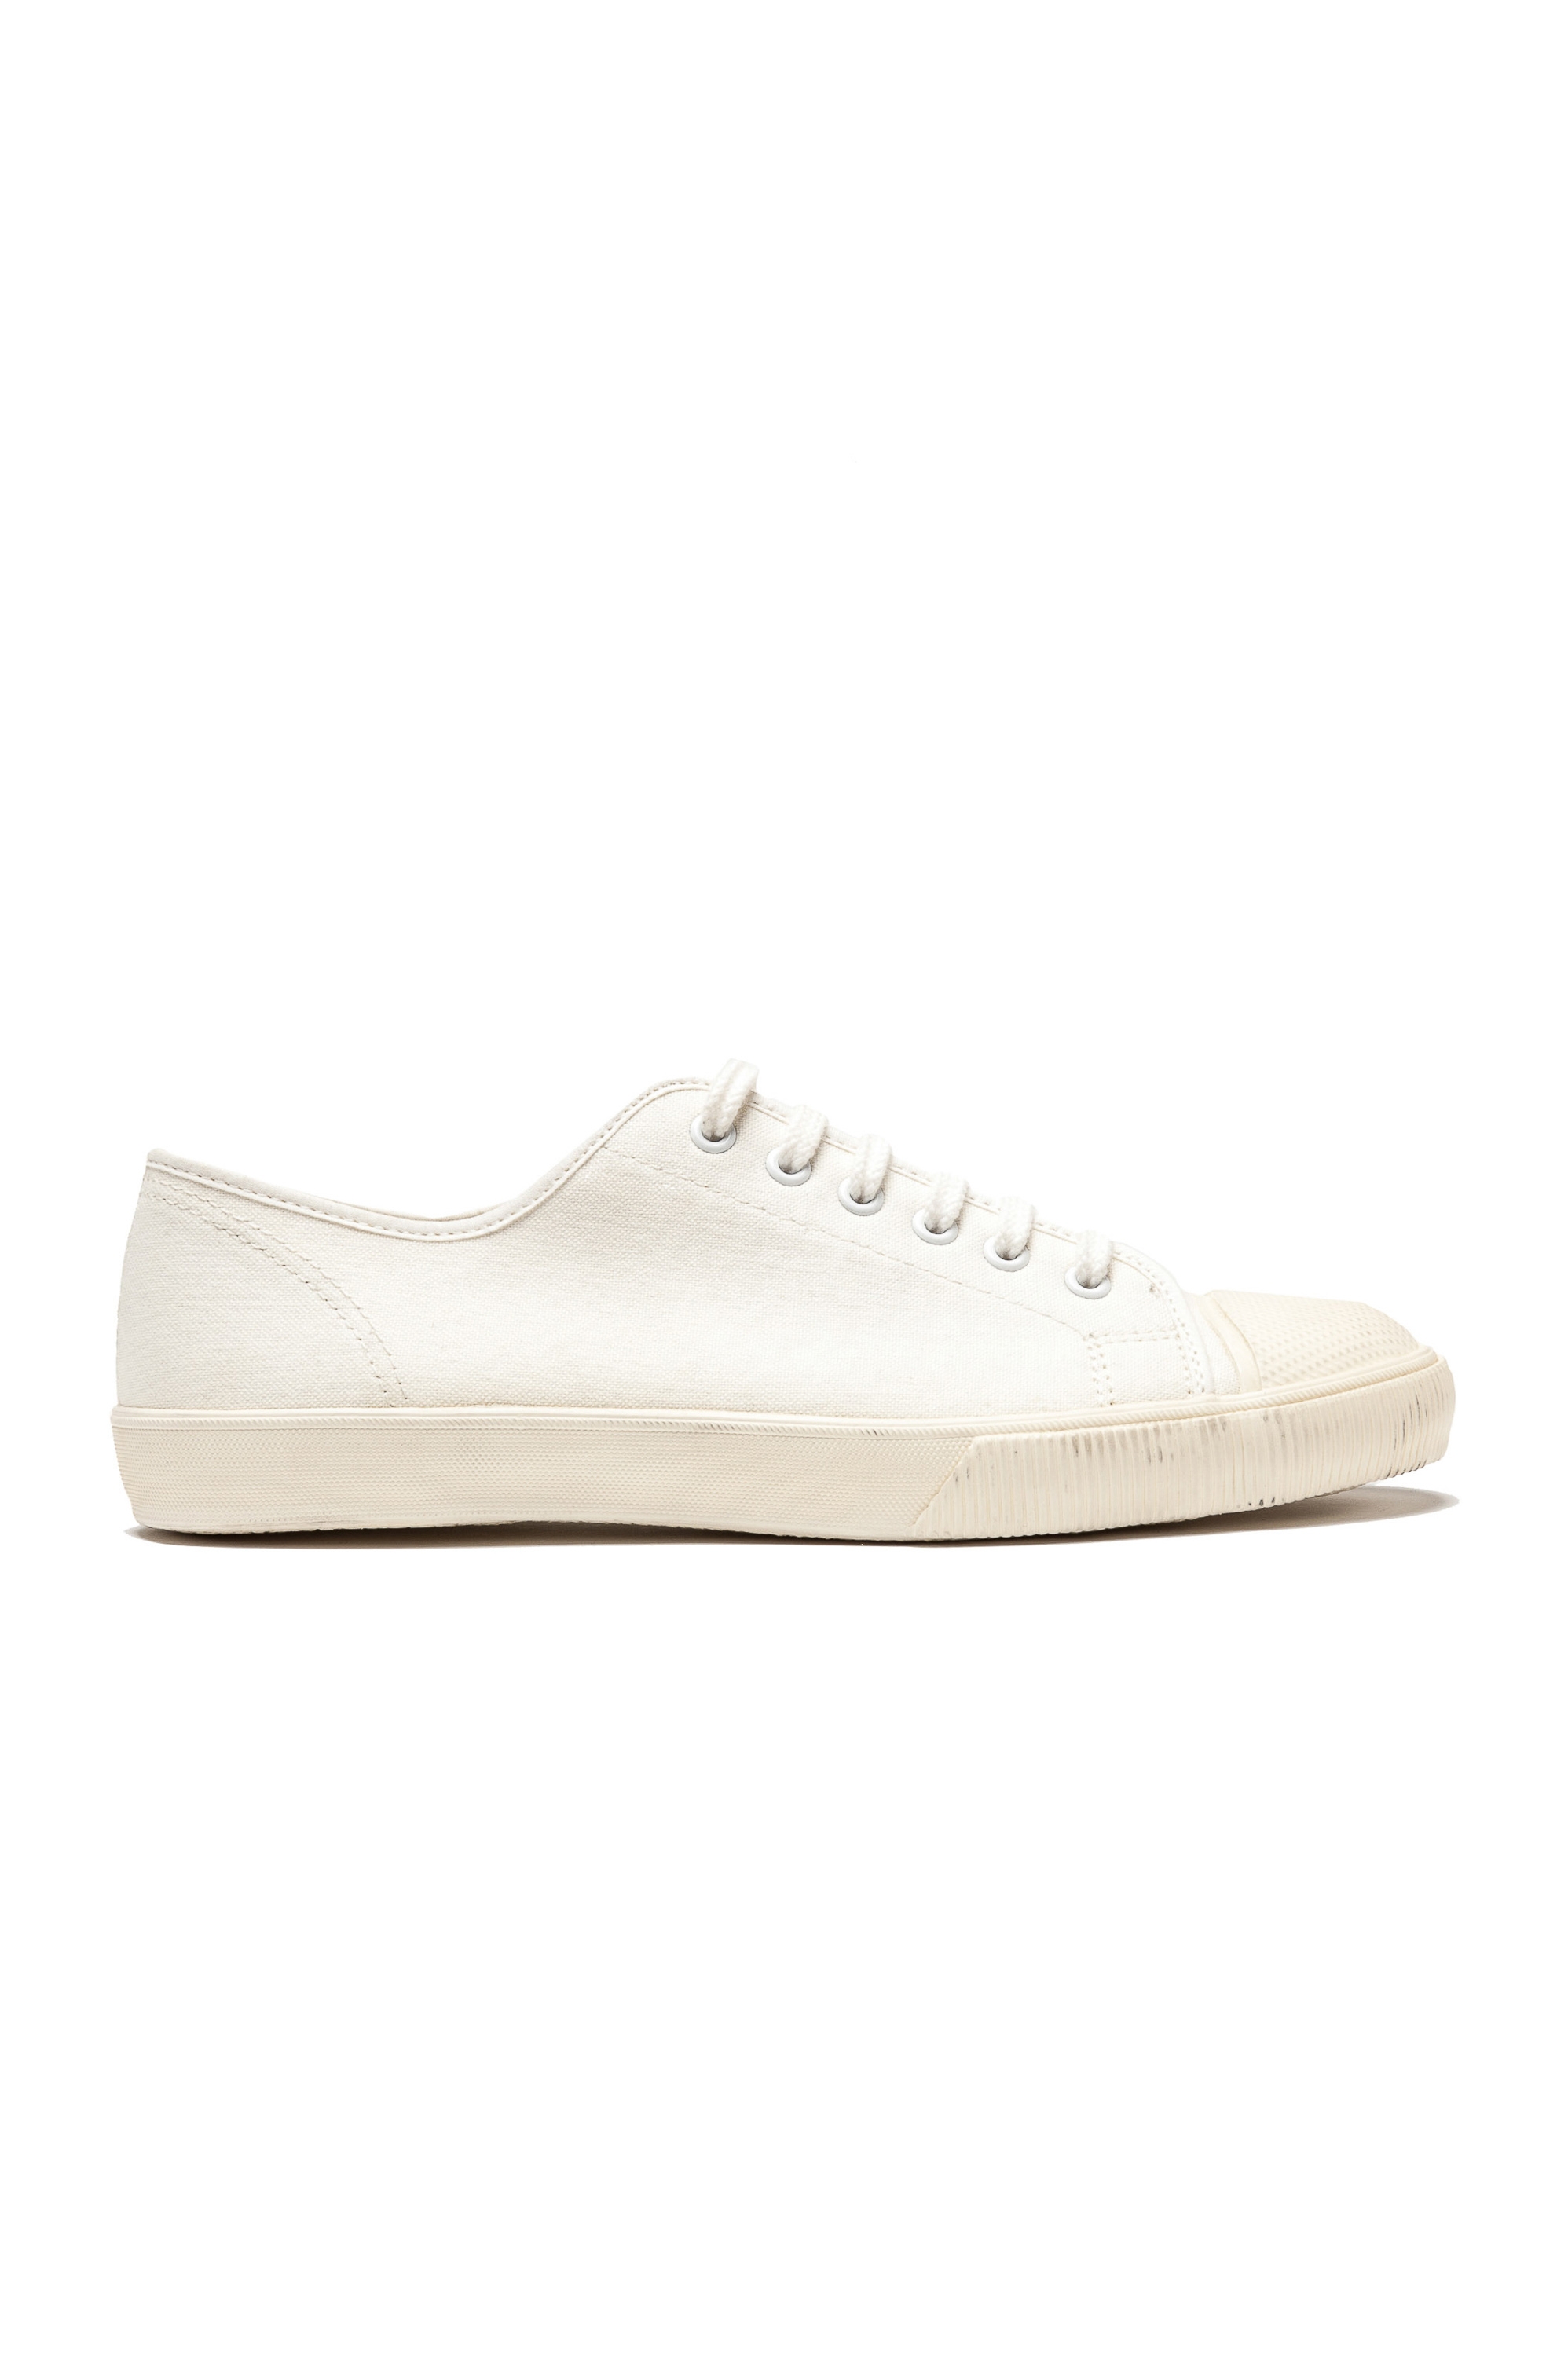 SBU 01531 Classic lace up sneakers in in white cotton canvas 01